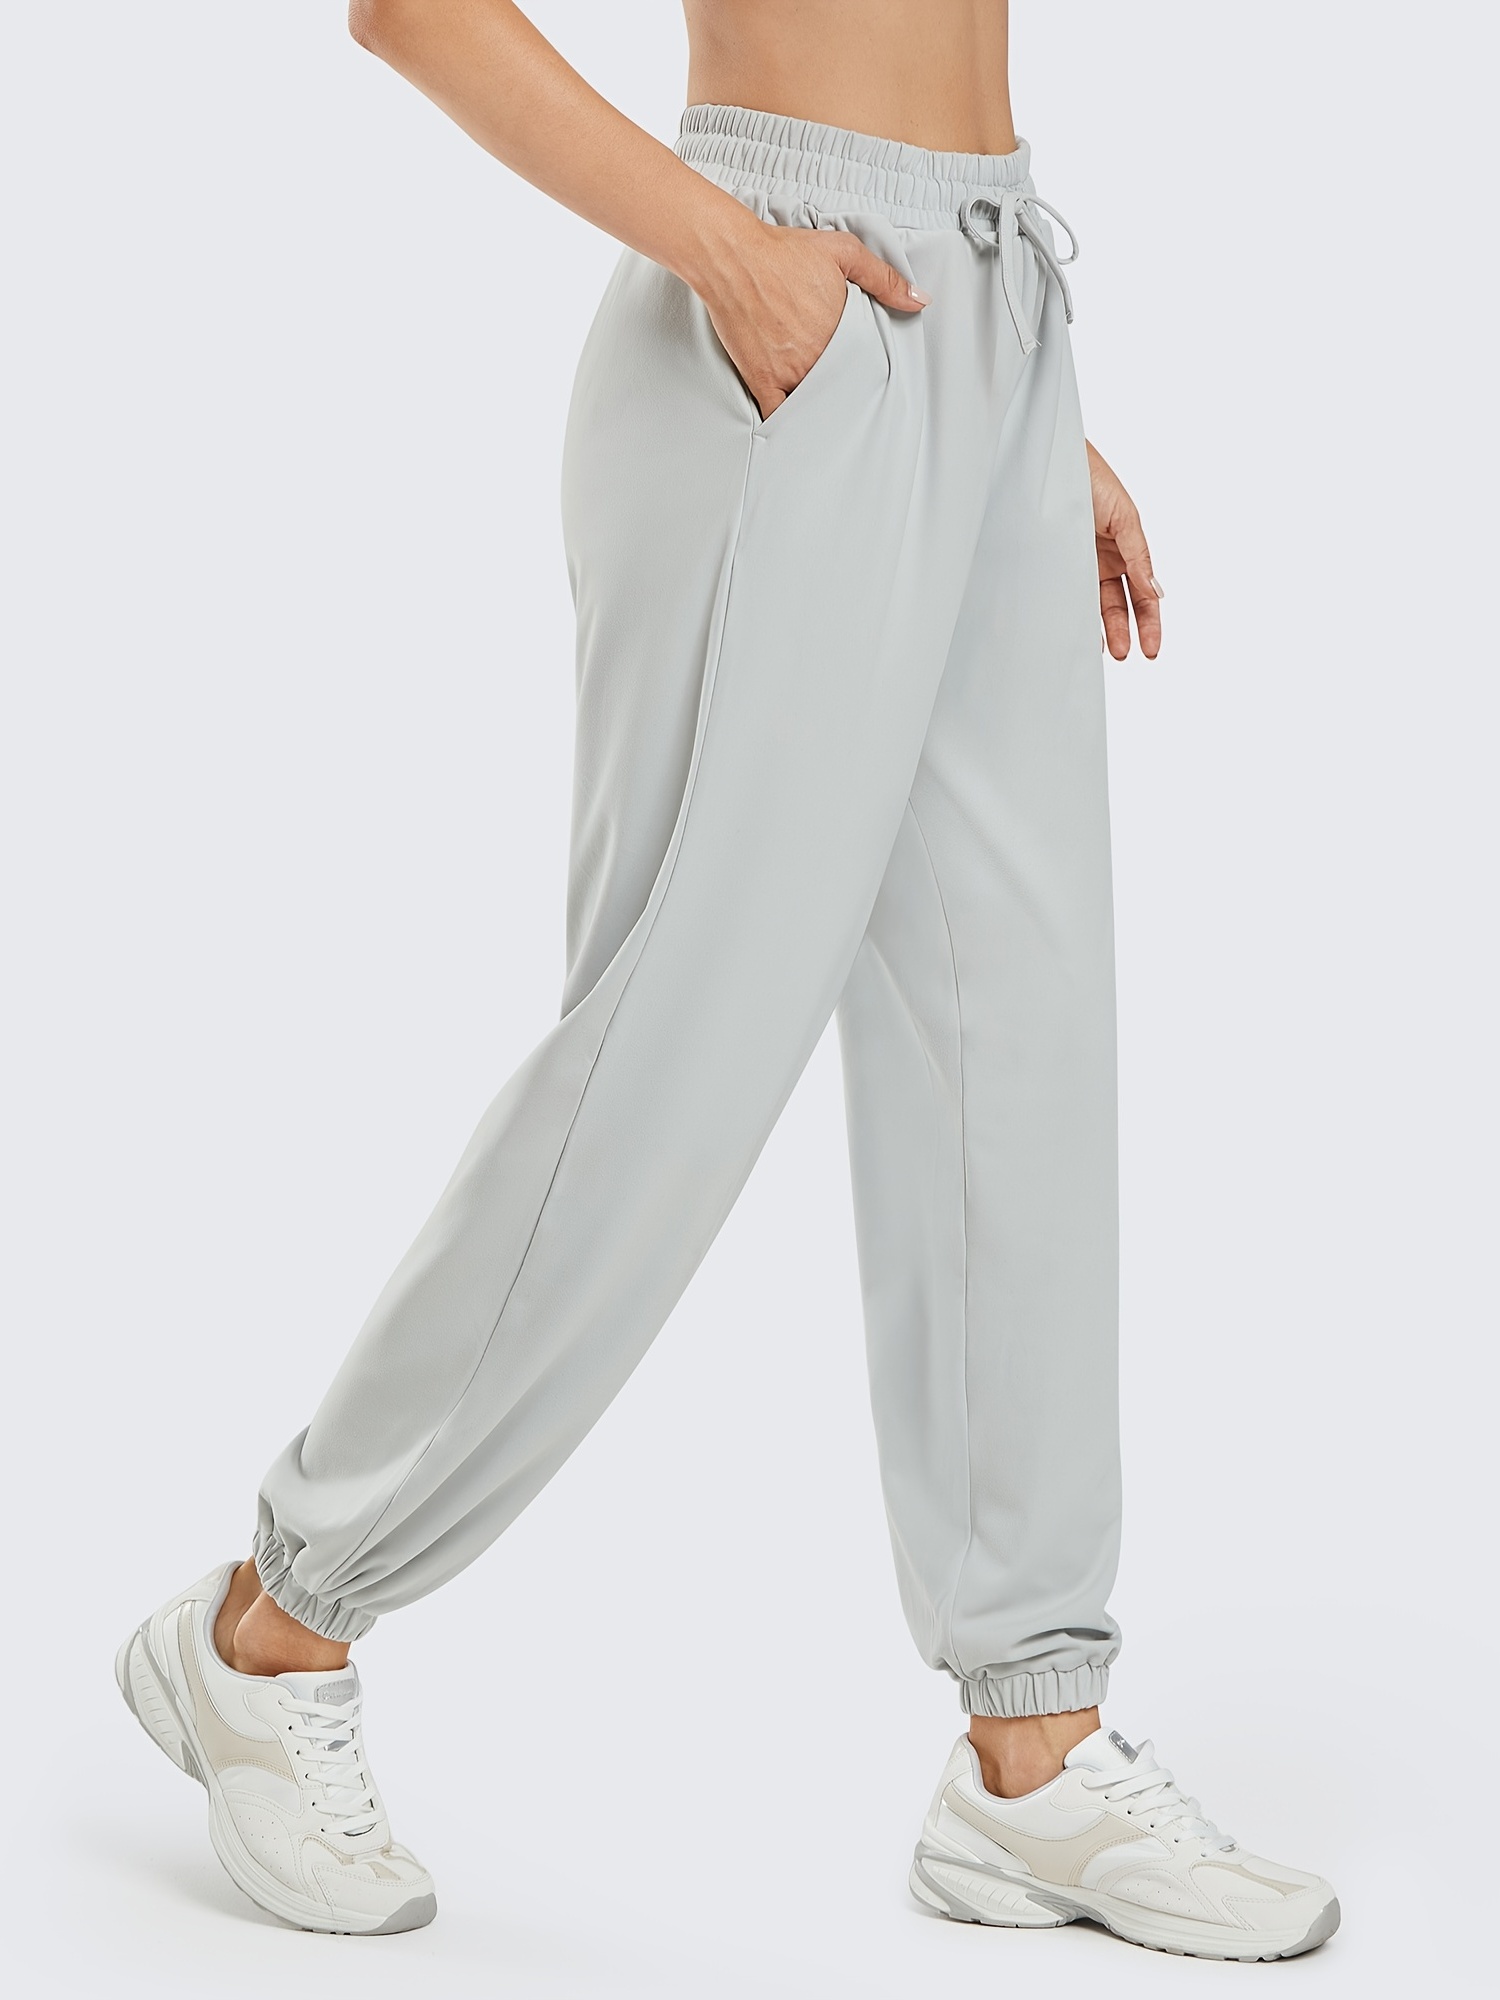 Women Sport Pants Solid Color Elastic High Waisted Sweatpant Comfy Trousers  Lightweight Joggers Pants with Pockets